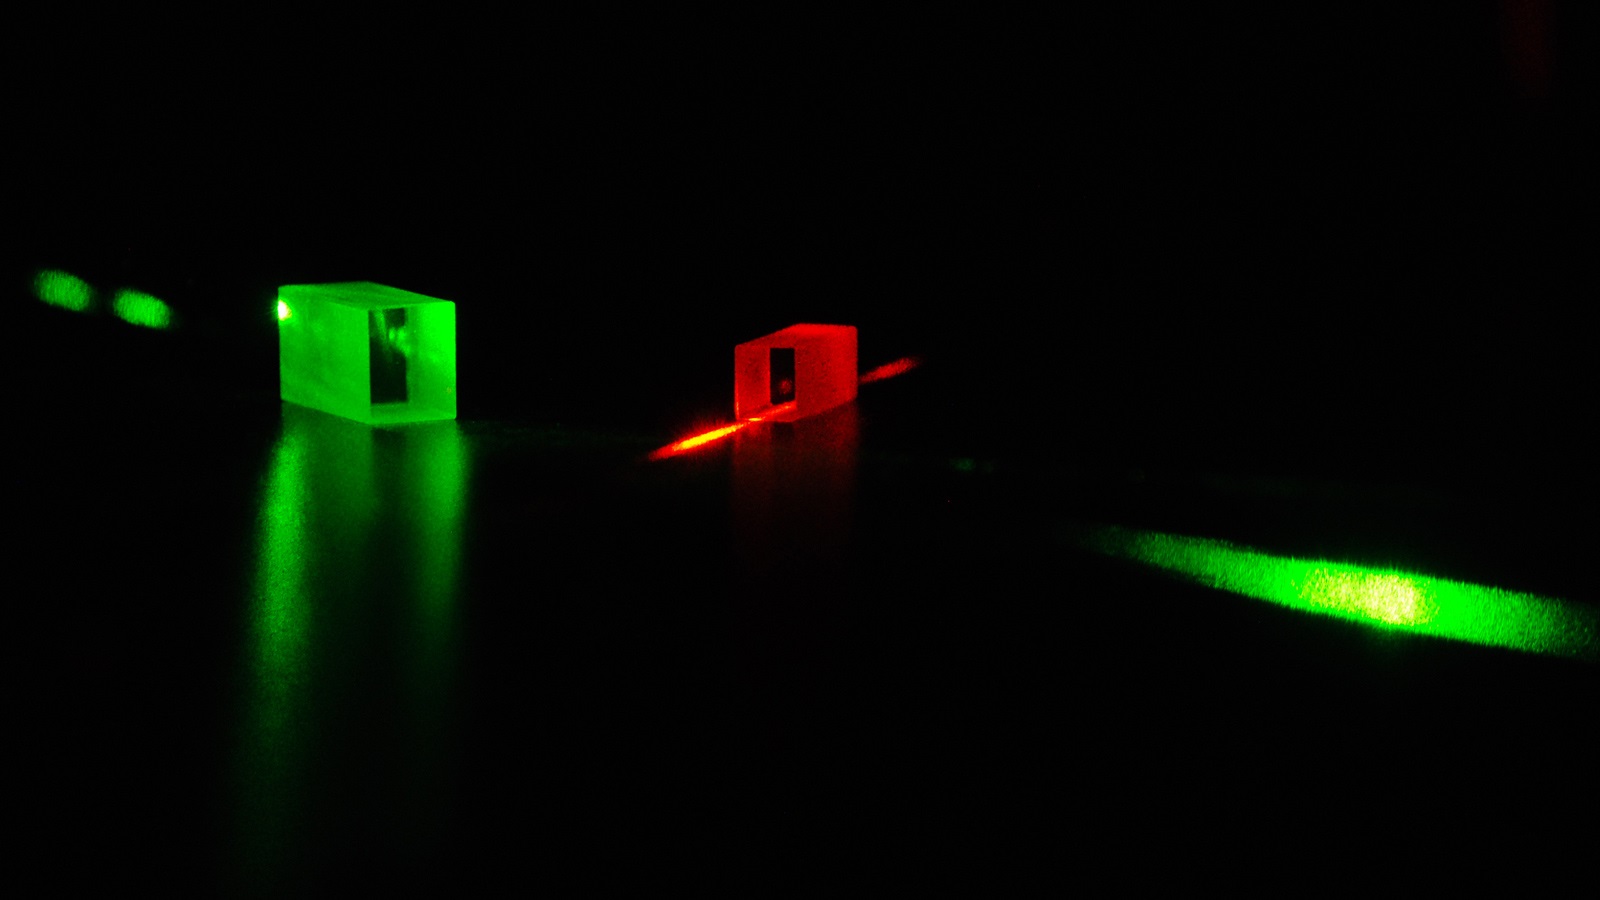 This image shows crystals used for storing entangled photons